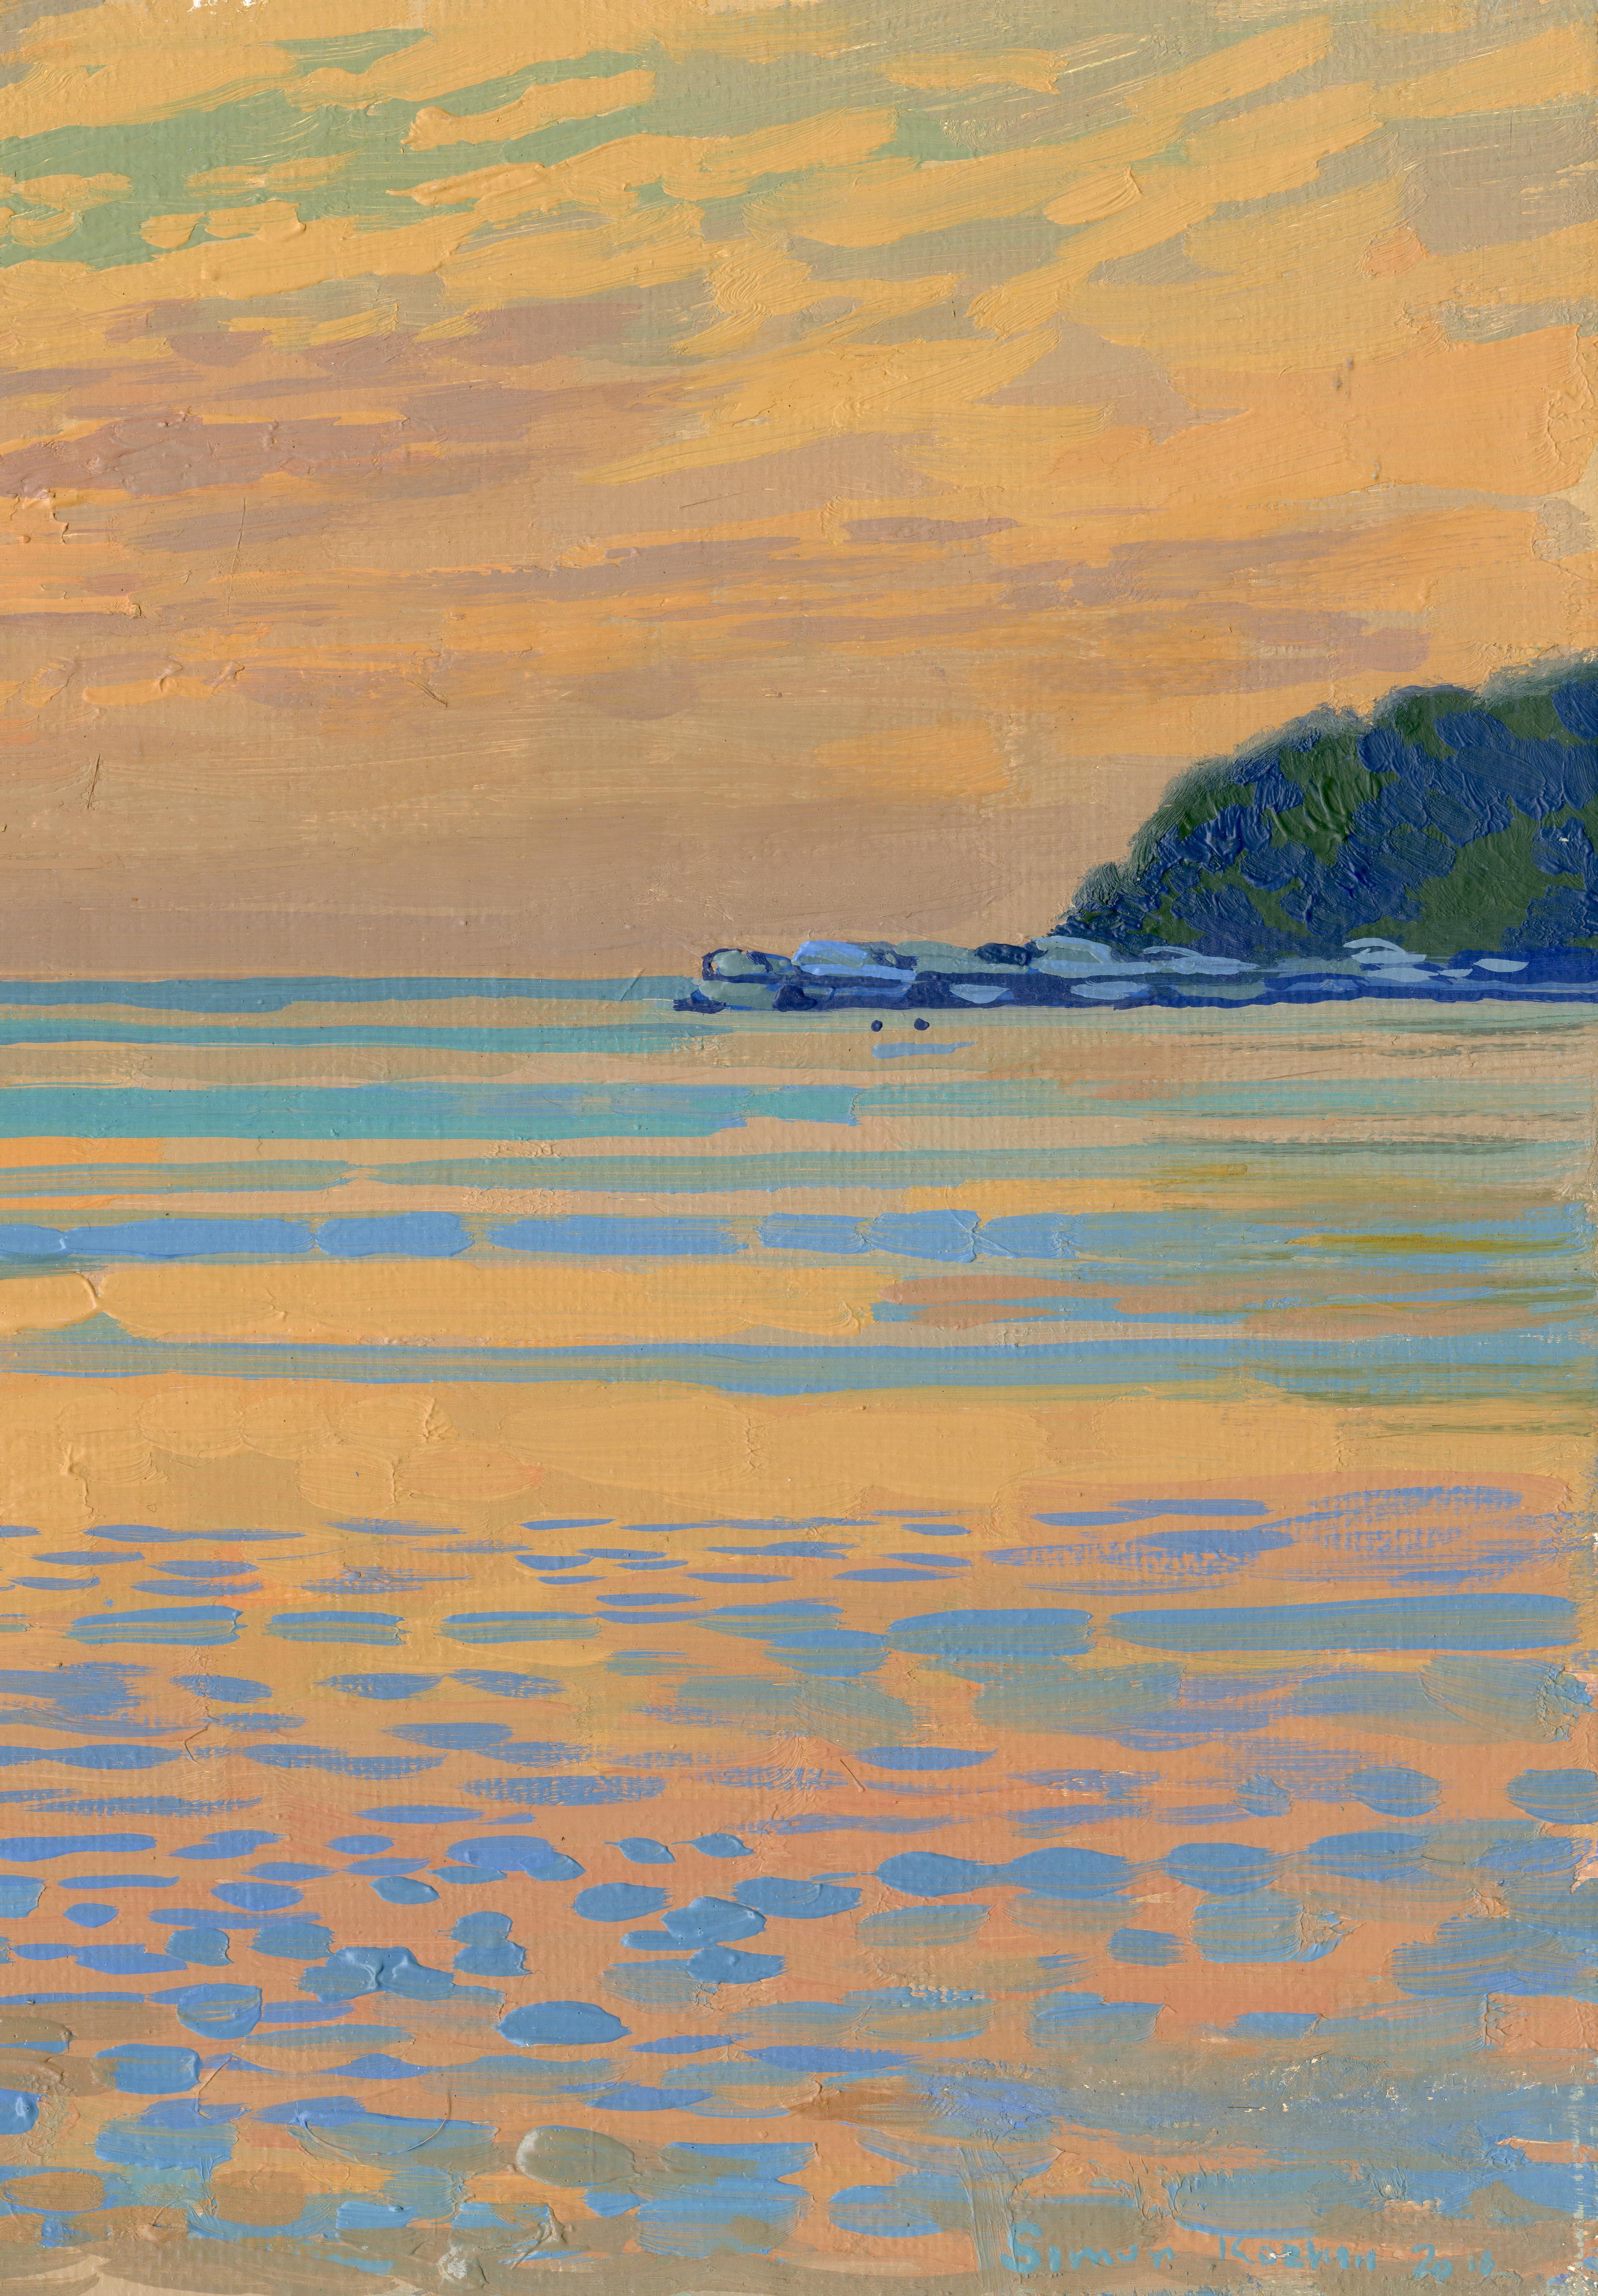 Calm and warm Adriatic coast in Croatia. Picturesque blue lagoon where when I was painting sketches I met a water vole more than once. Yachts at sunset as a dream come true for the perfect voyage.
Exhibition:
2024 The exhibition 